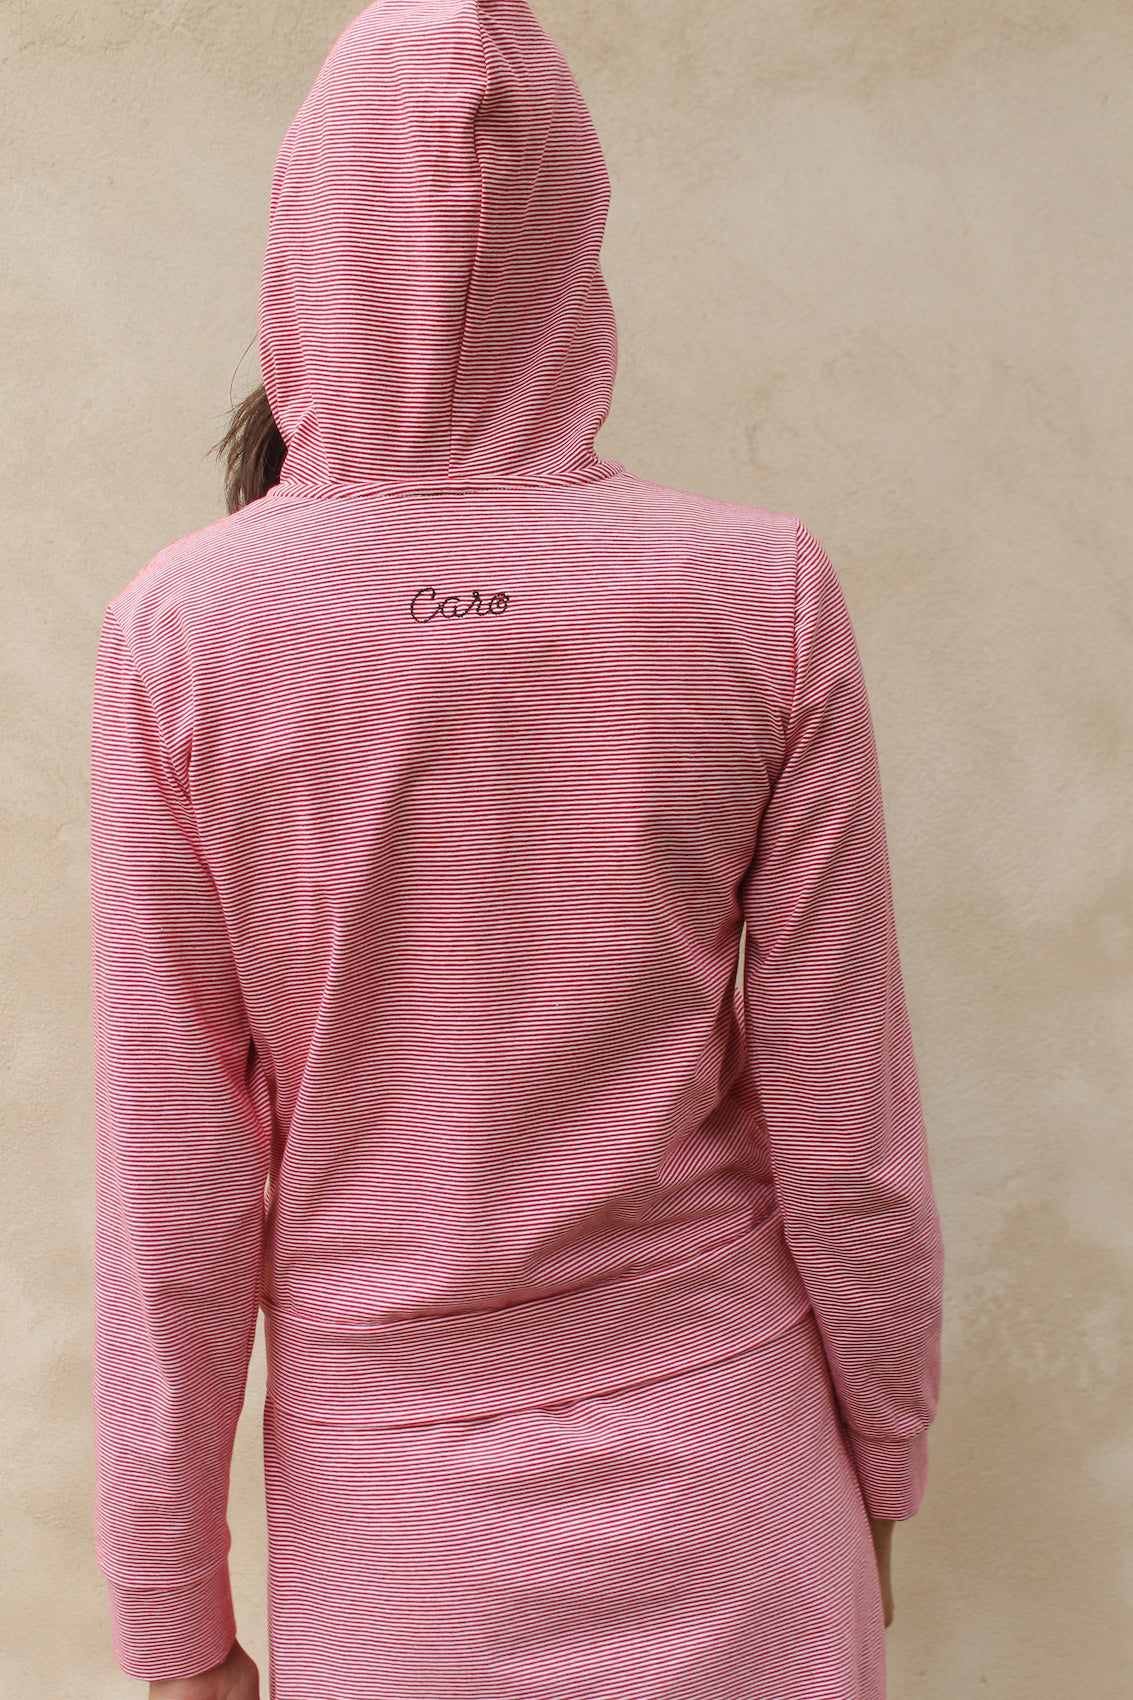 Caro Editions' new signature line in jersey cotton.  The Caro PJ Hoodie is a slightly fitted style with long sleeves, a zipper opening on the front, and embroidered Caro Editions logo on the back.   Also available in Black White stripe.  Style the Caro PJ Hoodie under a jacket or shirt, with matching Caro PJ Leggings, jeans, or a skirt.  Material: 95% cotton, 5% elastane. Bow: 100% Polyester.  The model is 179cm (5'10") and is wearing a size S.